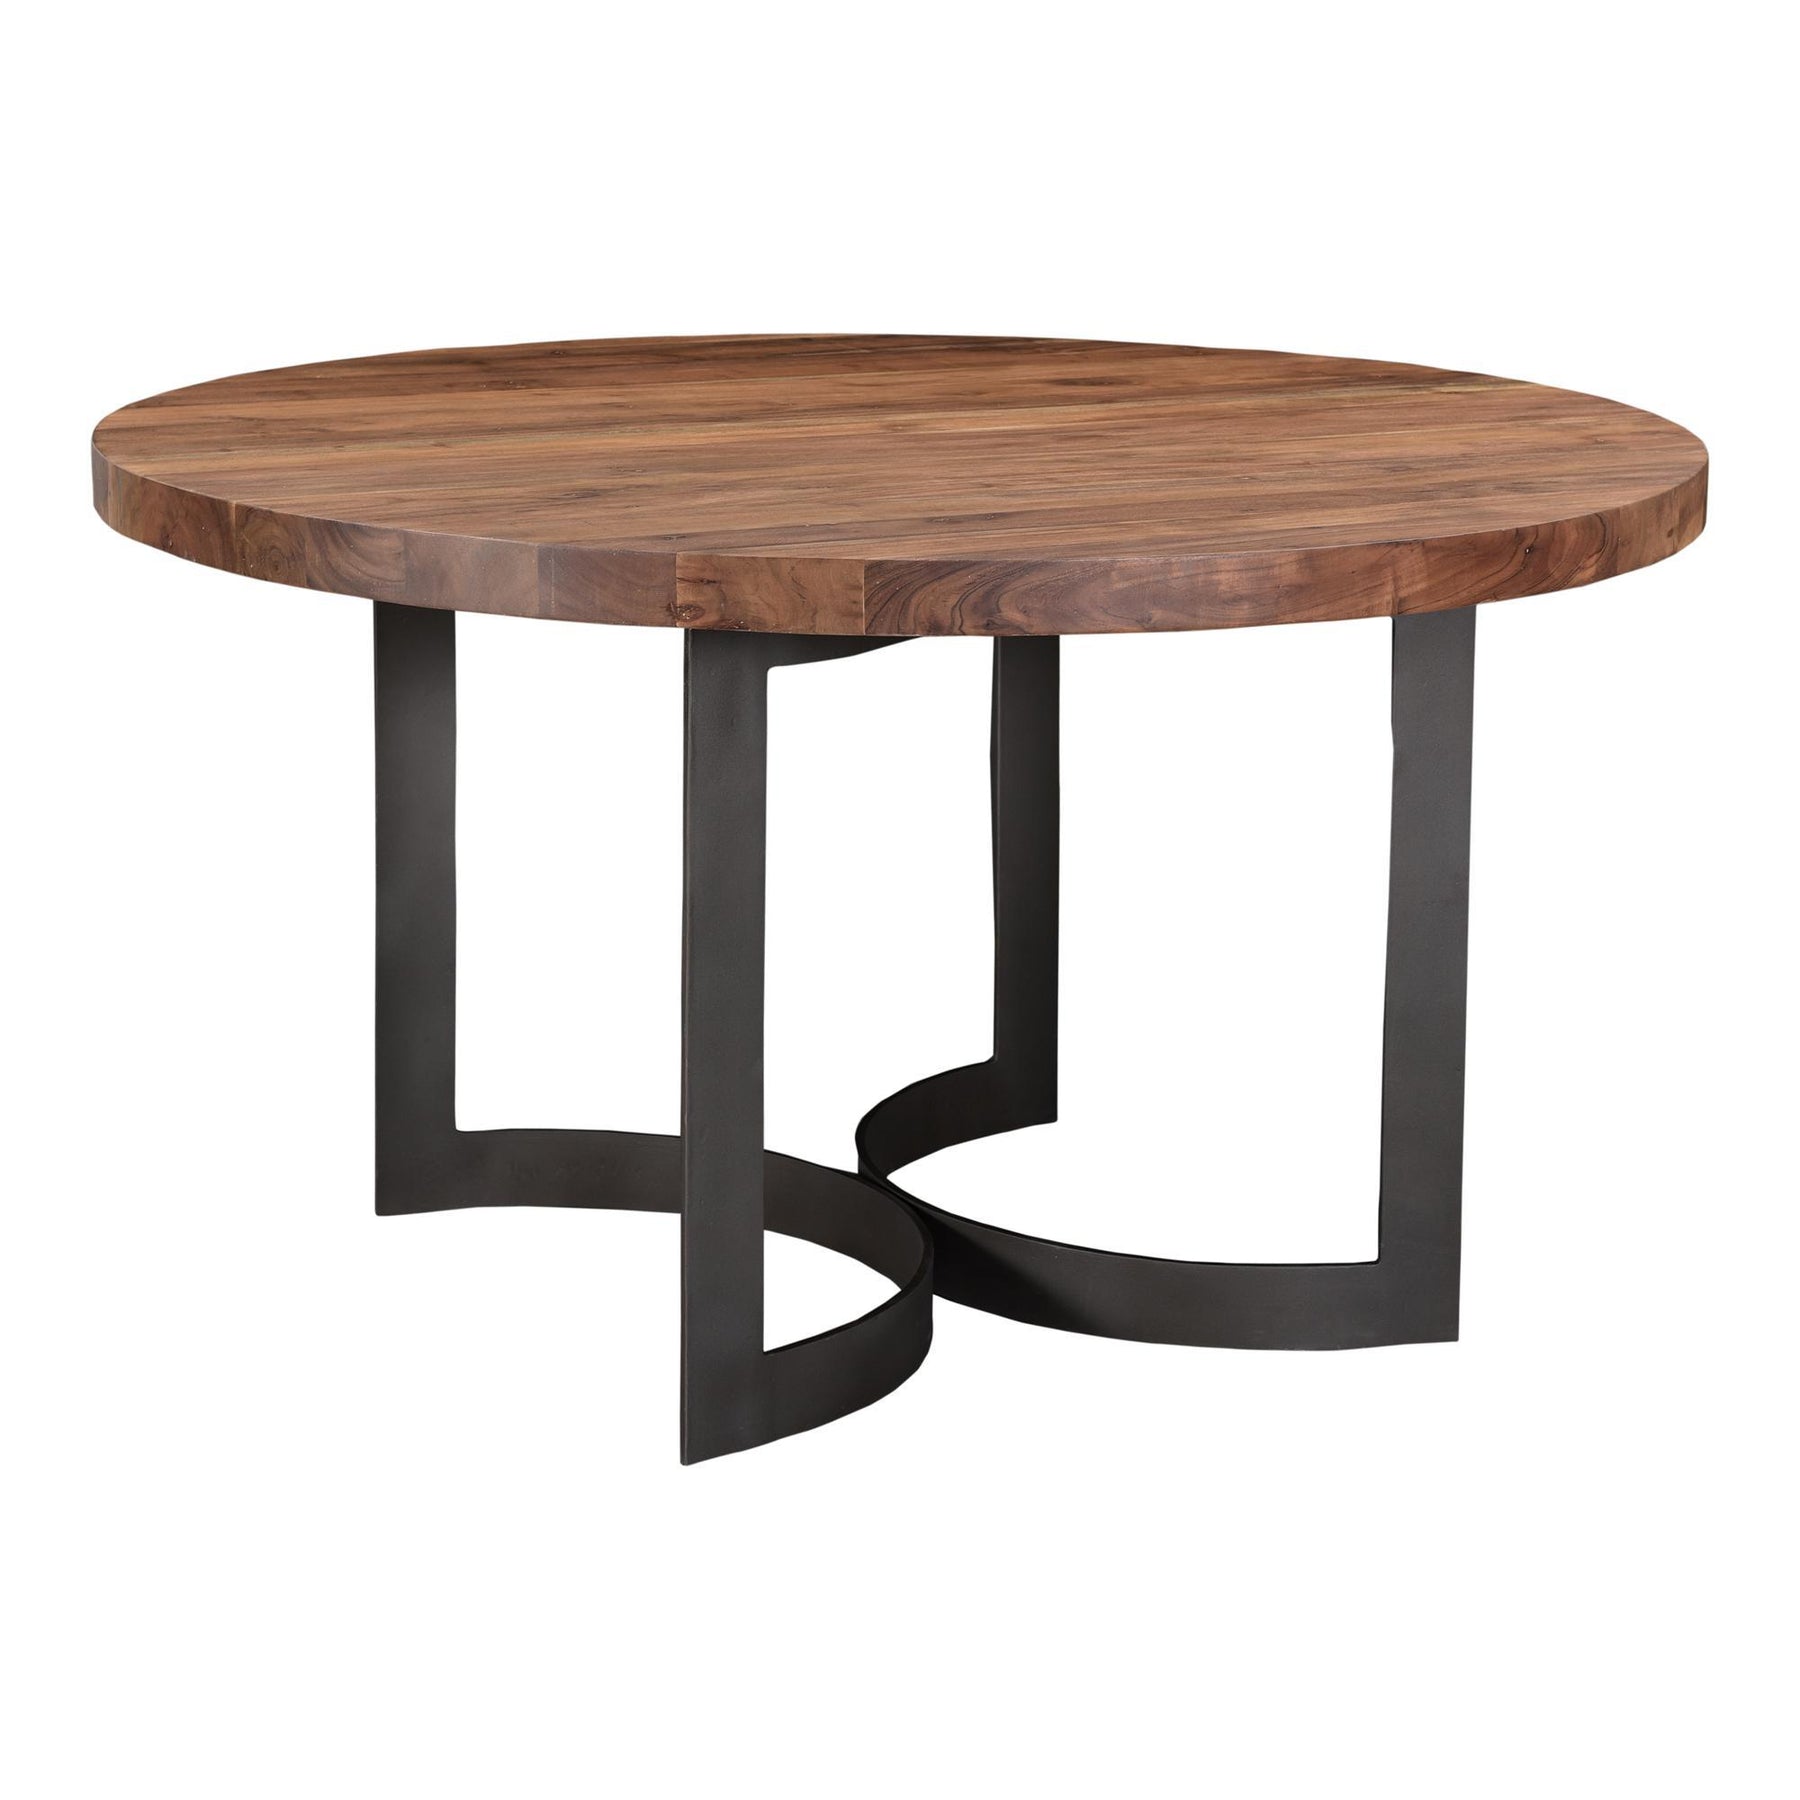 Moe's Home Collection Bent Round Dining Table 54" Smoked - VE-1106-03